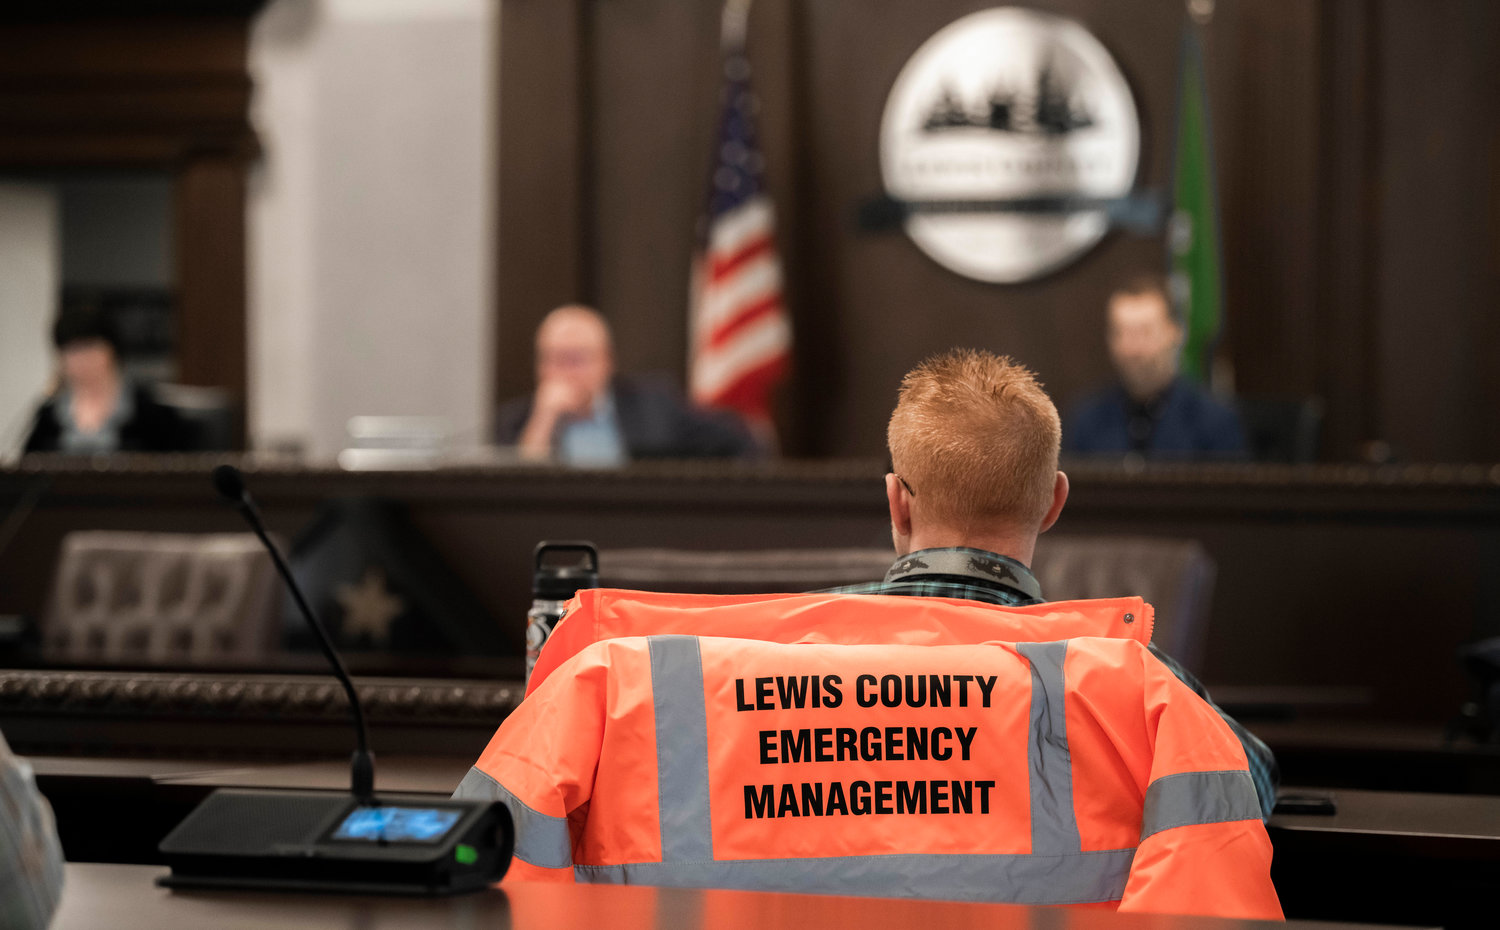 Josh Metcalf, with Lewis County Emergency Management, attends a meeting with county commissioners Tuesday morning in Chehalis.